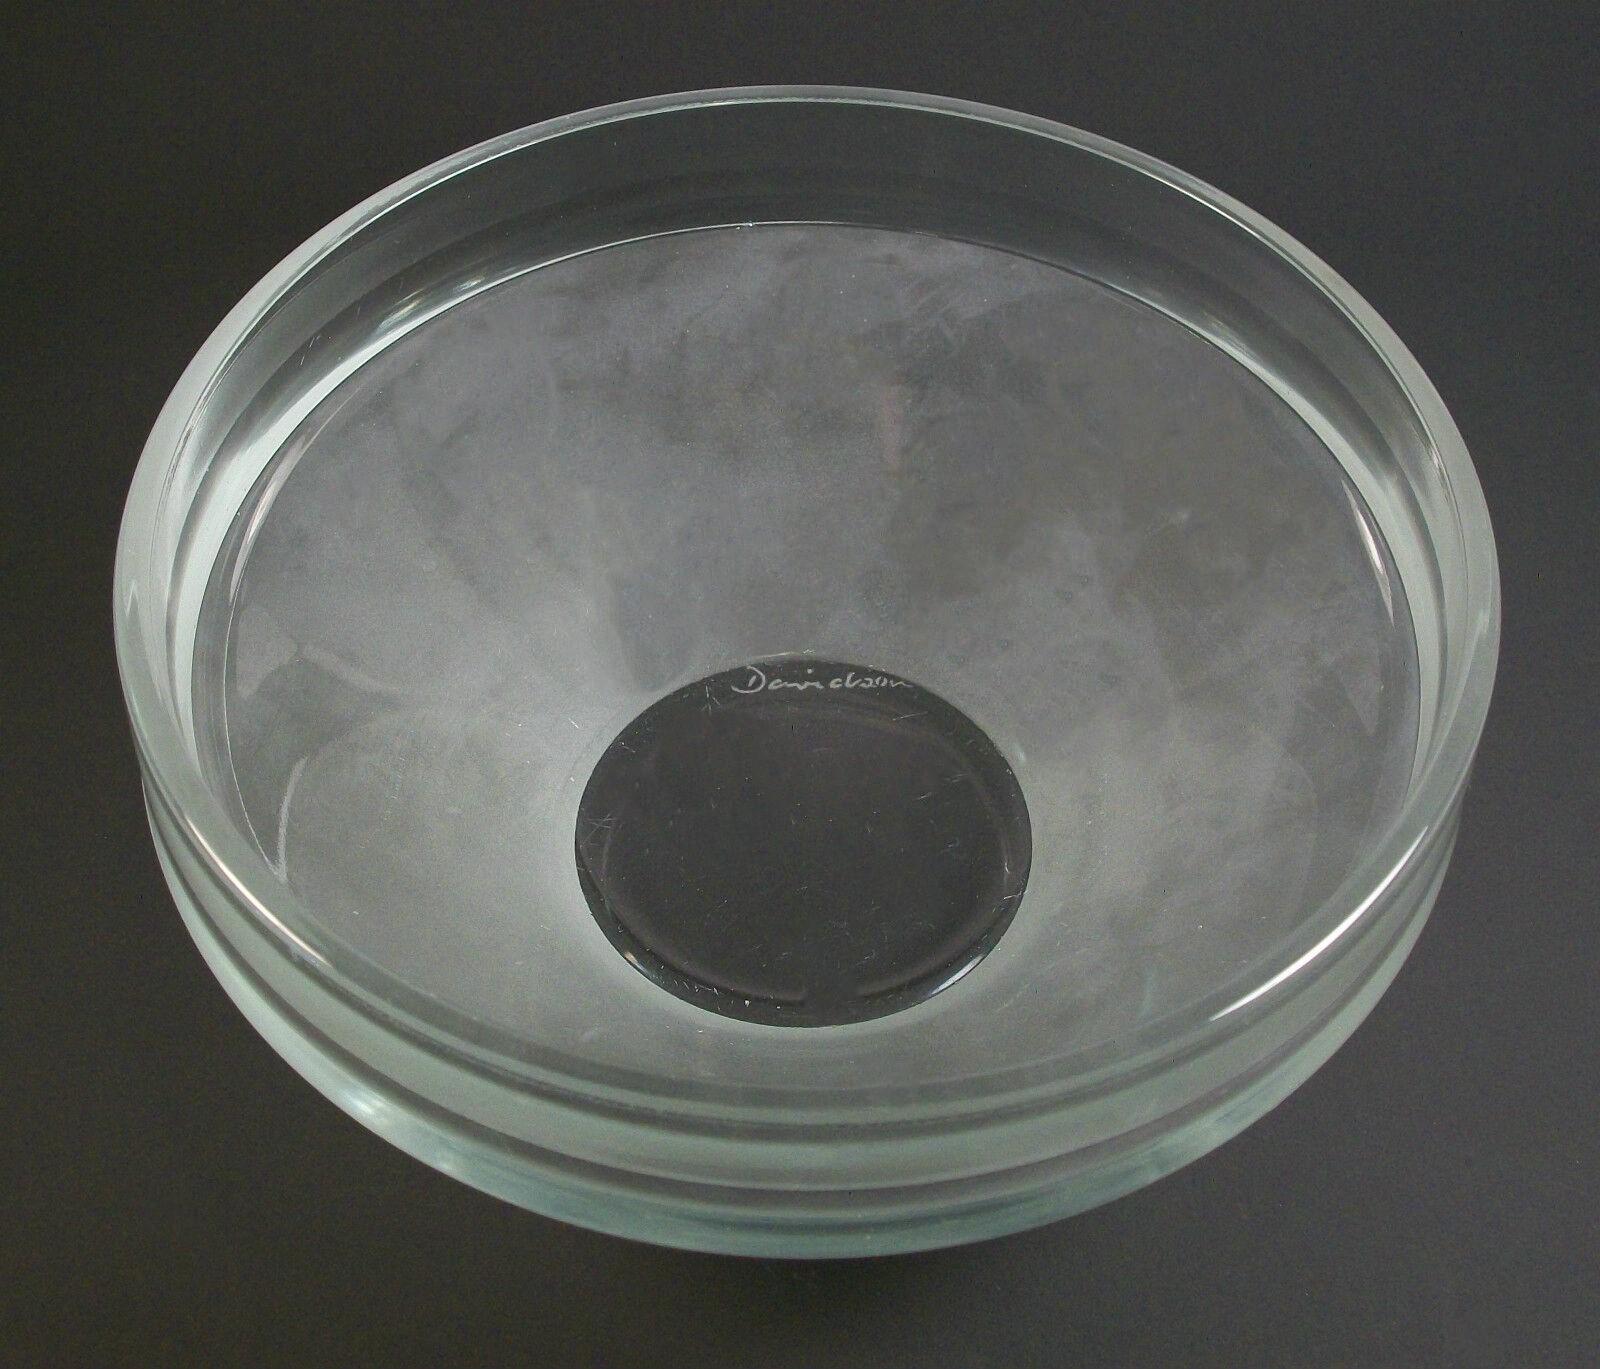 Vintage frosted studio glass bowl - signed Davidson - acid etched signature on the base - late 20th century.

Excellent vintage condition  - minor base rim chips - surface scratches from age and use - no restoration.

Size - 7 1/2